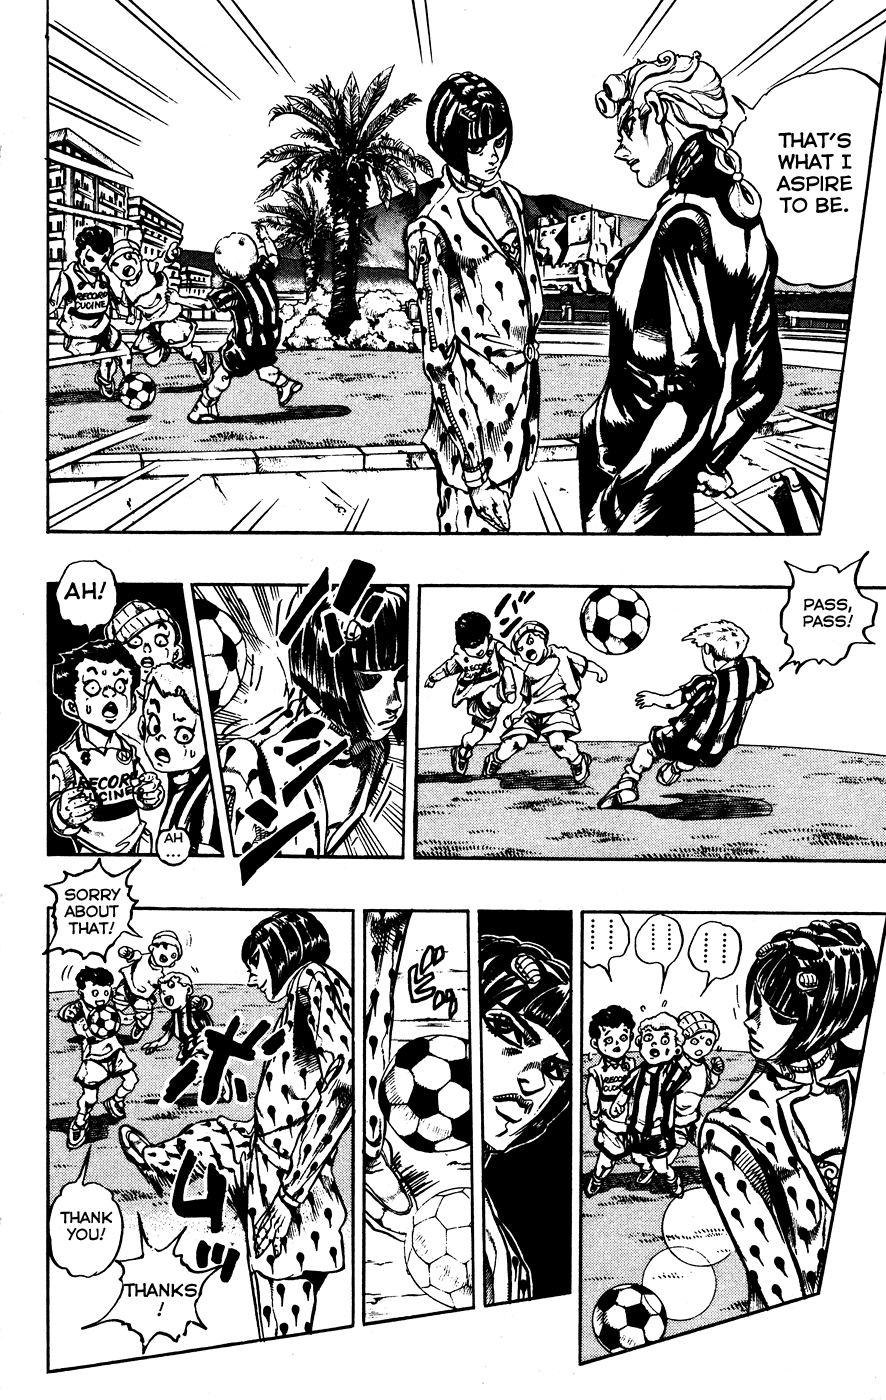 Jojo's Bizarre Adventure Part 5 - Vento Aureo Vol.2 Chapter 9: Meet The Gangster Behind The Wall Part 1 - Picture 2